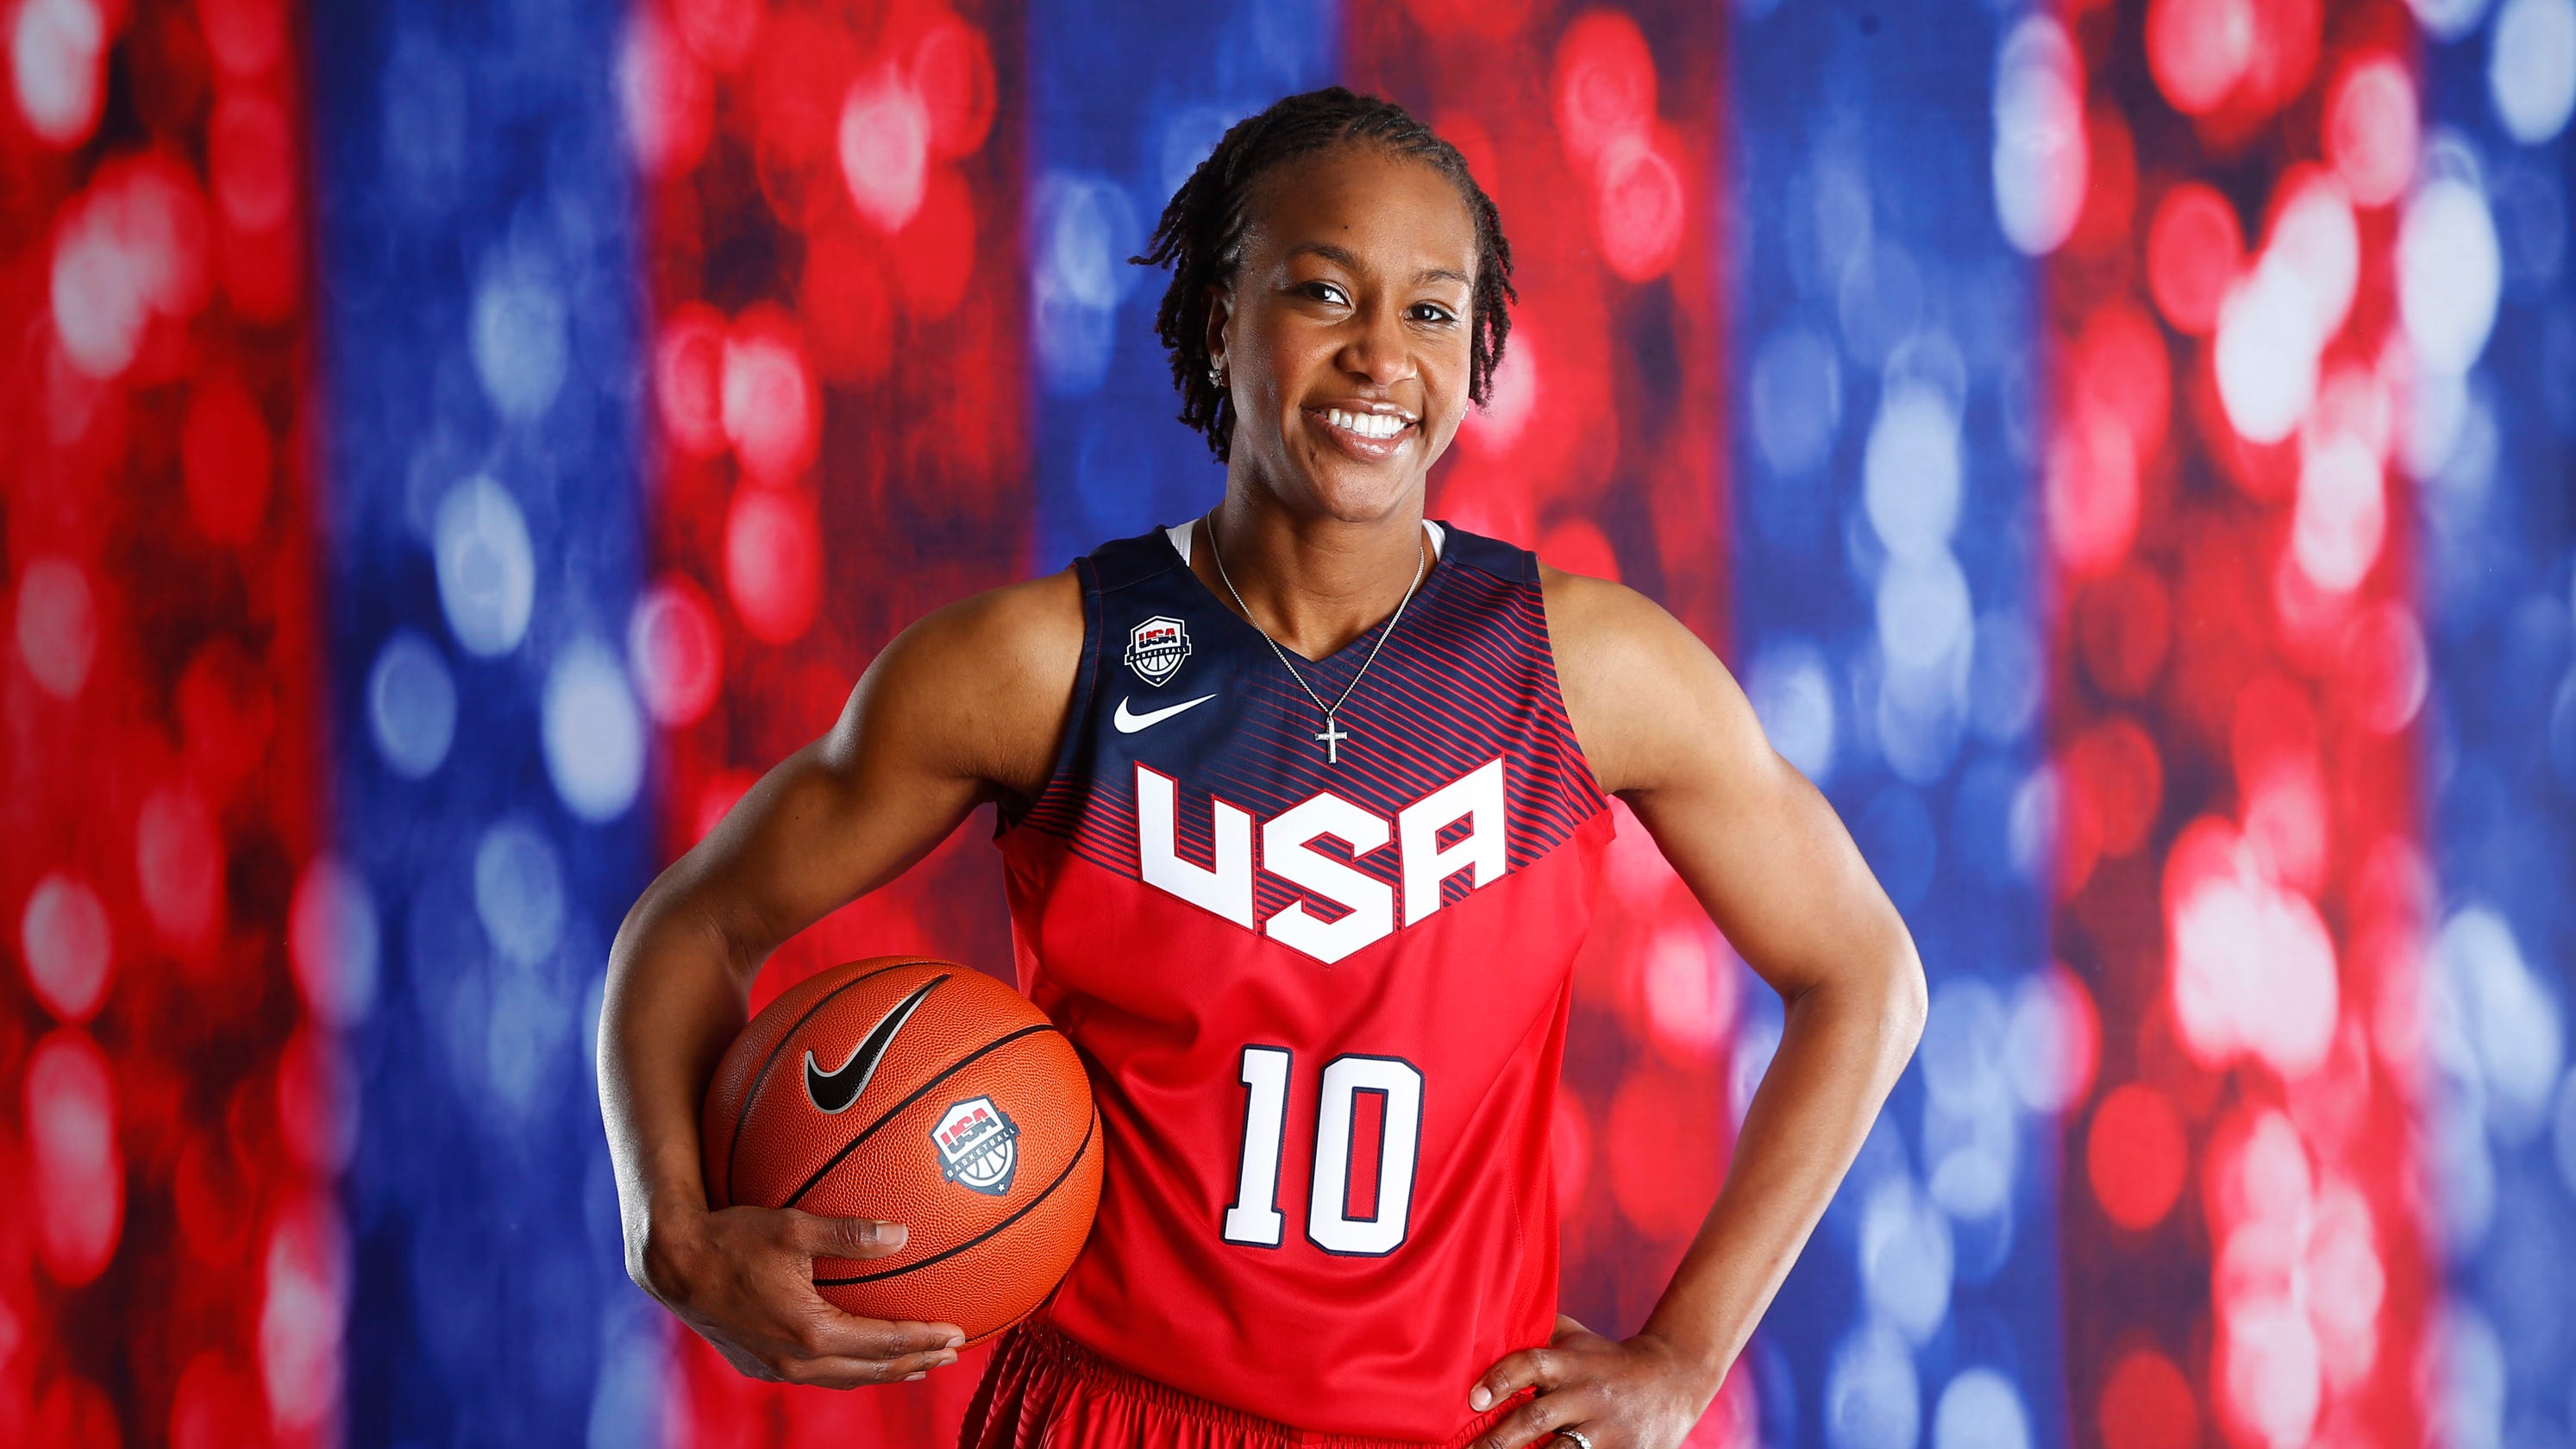 'American Ninja Warrior:' Why Tamika Catchings wanted to compete